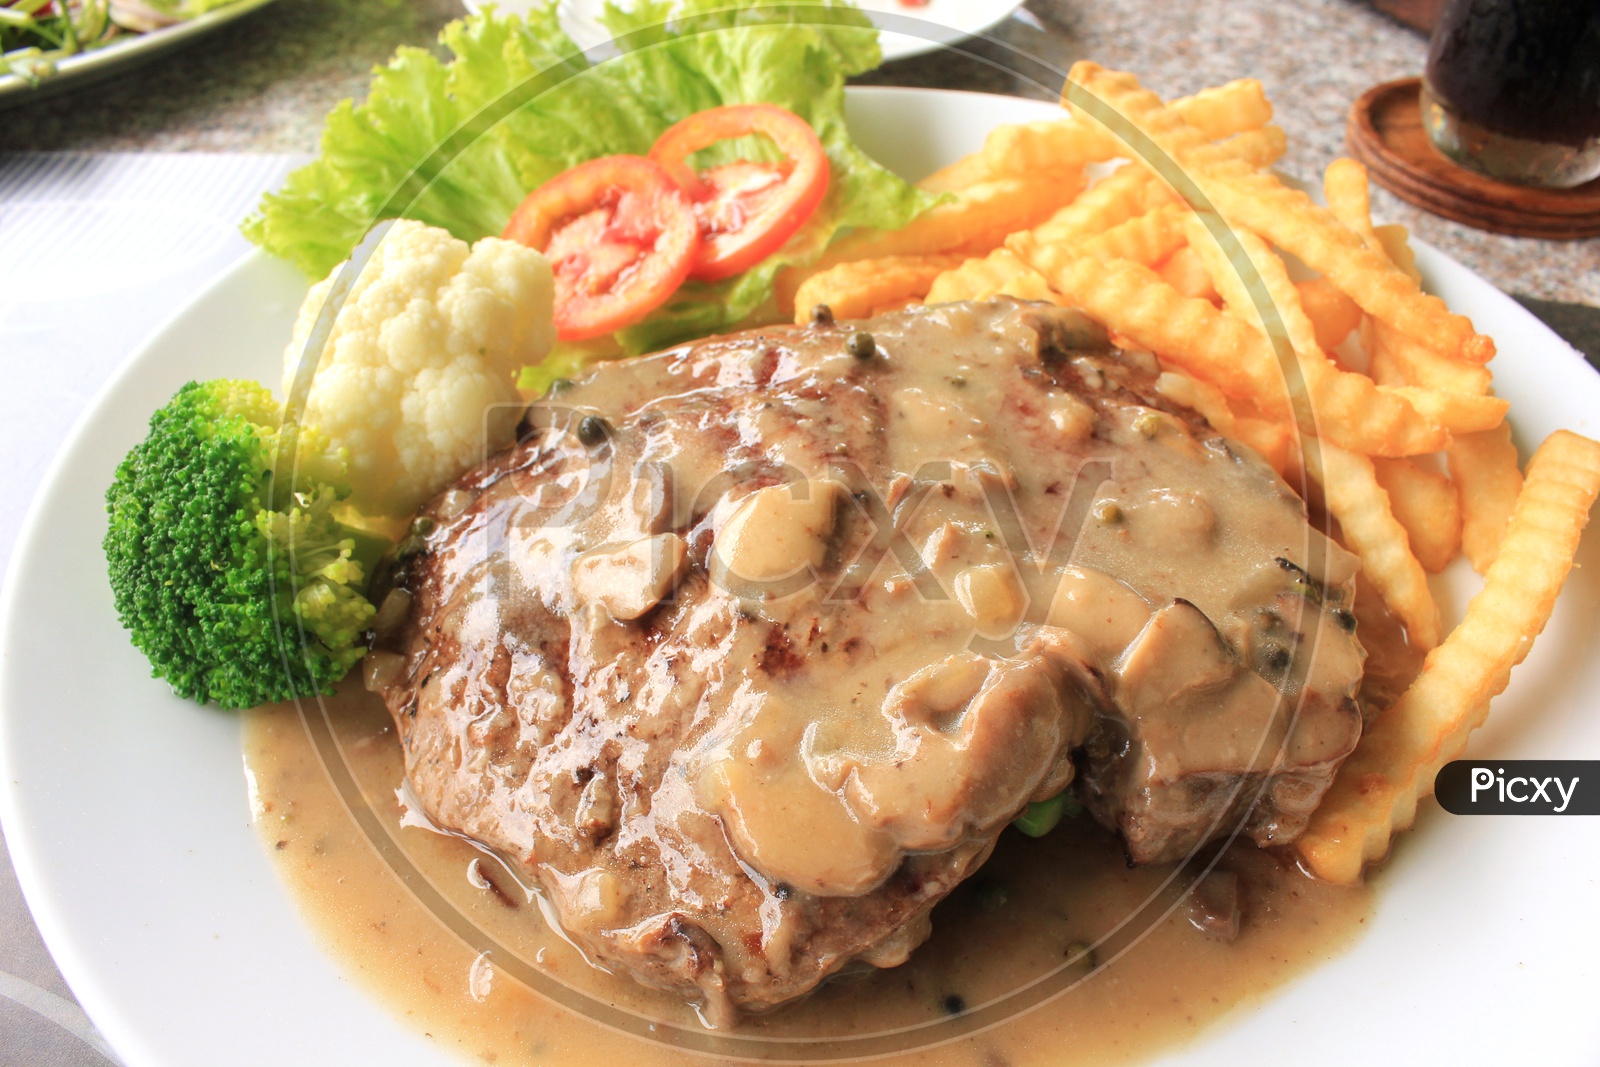 Beef steak with French Fries and Garnished with Leafy Vegetables